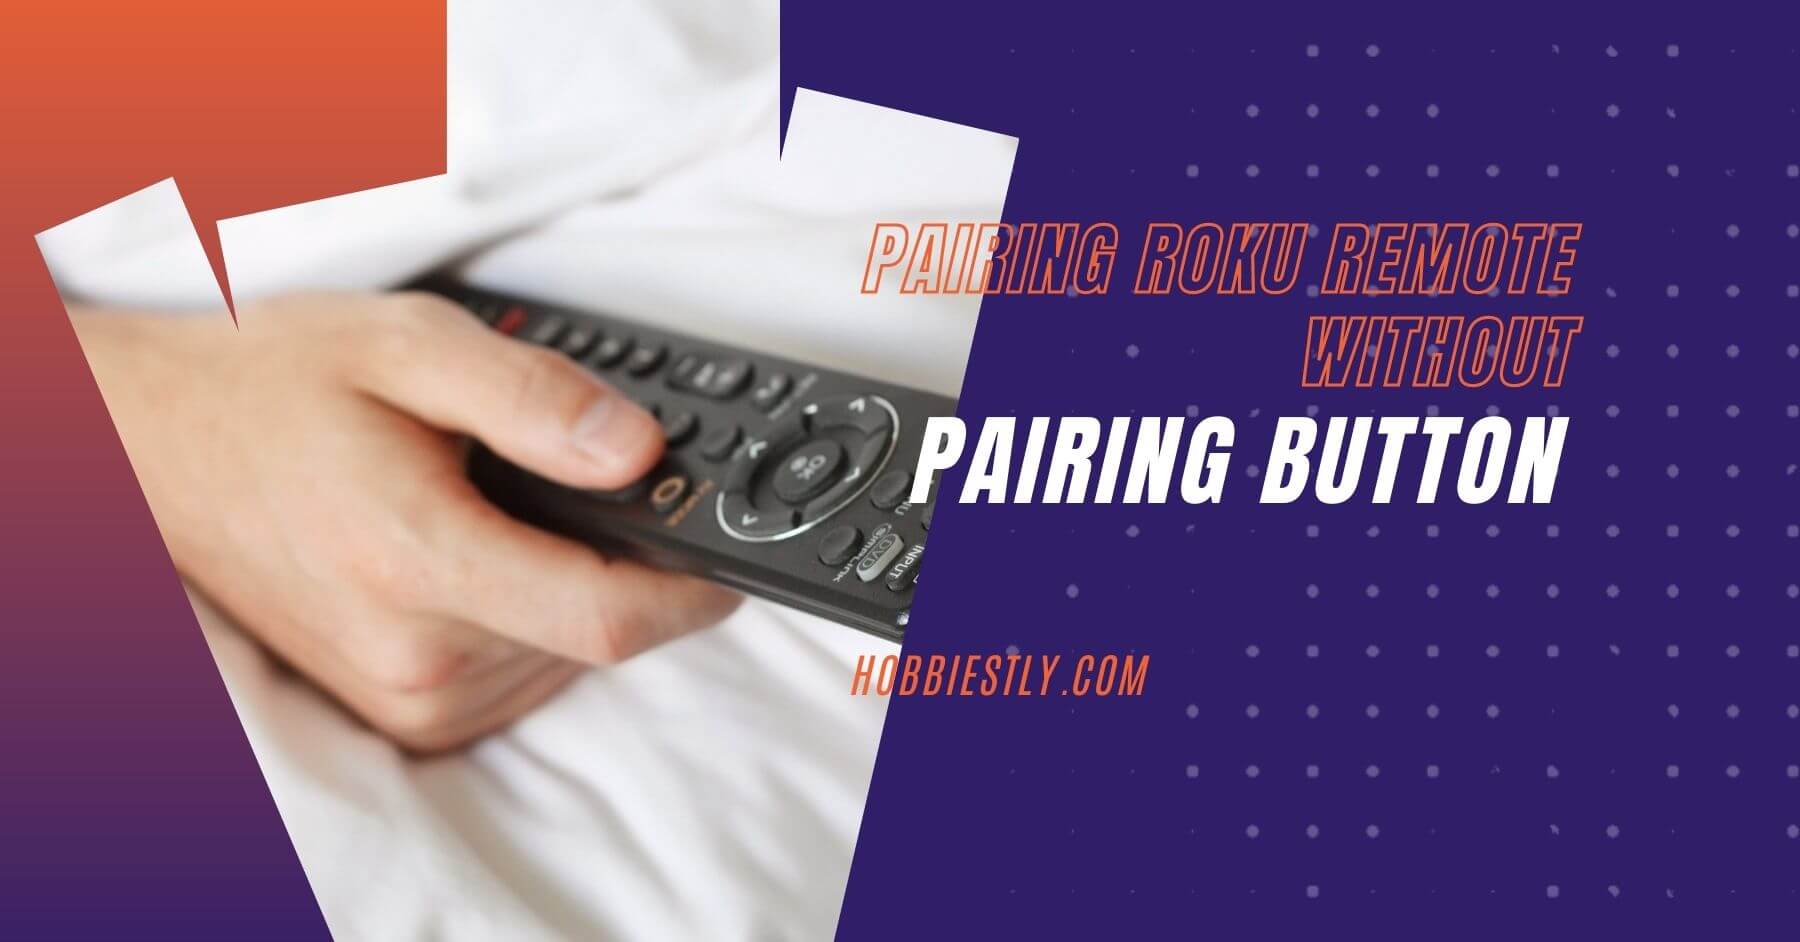 How to Pair Your Roku Remote without a Pairing Button